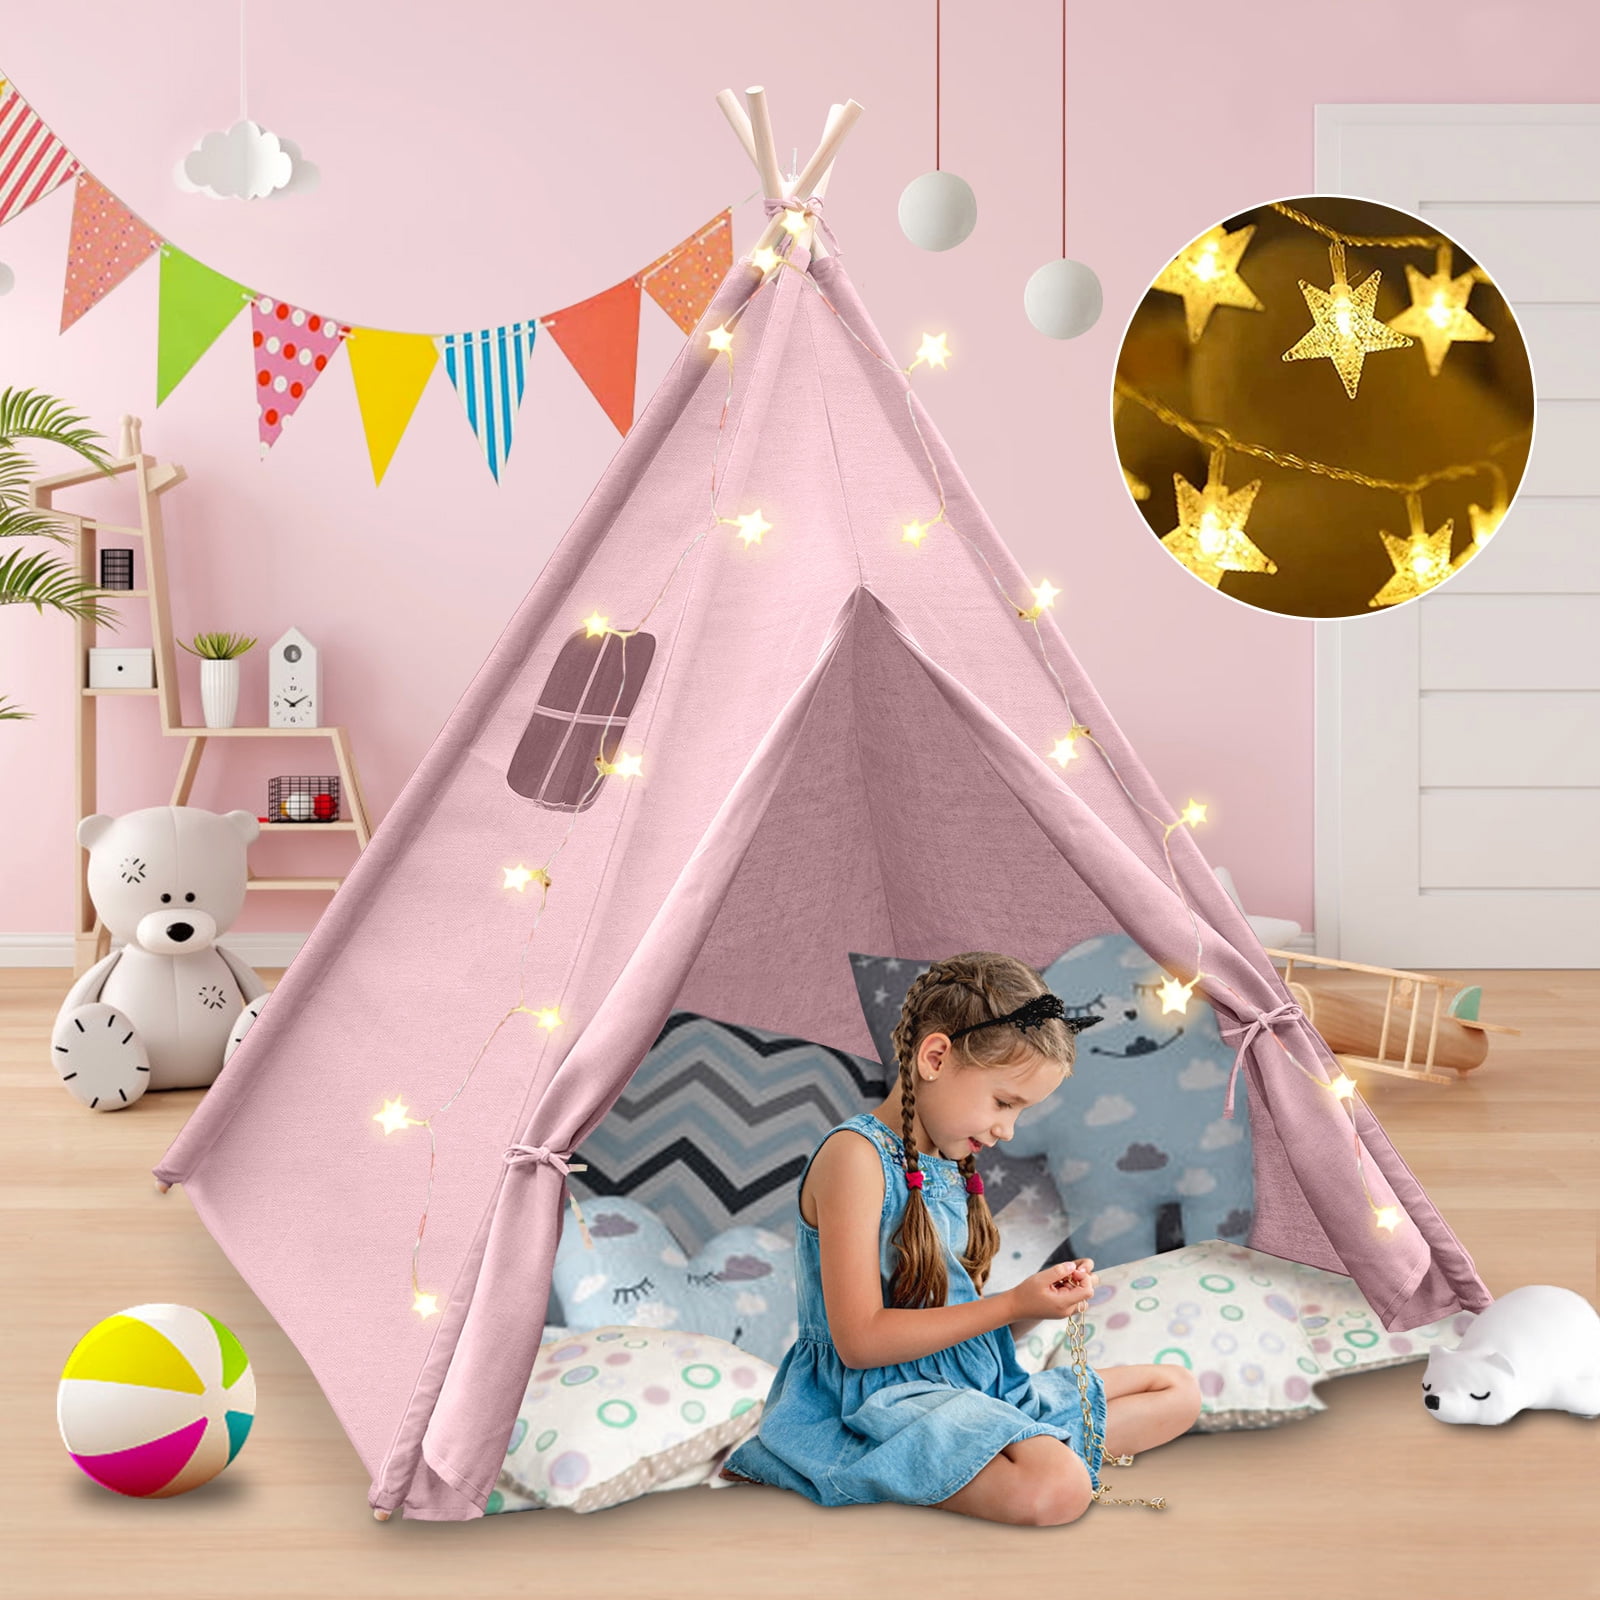 Wisairt Kids Tent, Kids Play Tent with Star Lights and Bunting, Washable Foldable Teepee Tent, Outdoor Indoor DIY Toddler Tent for Girls Boys  (Pink)